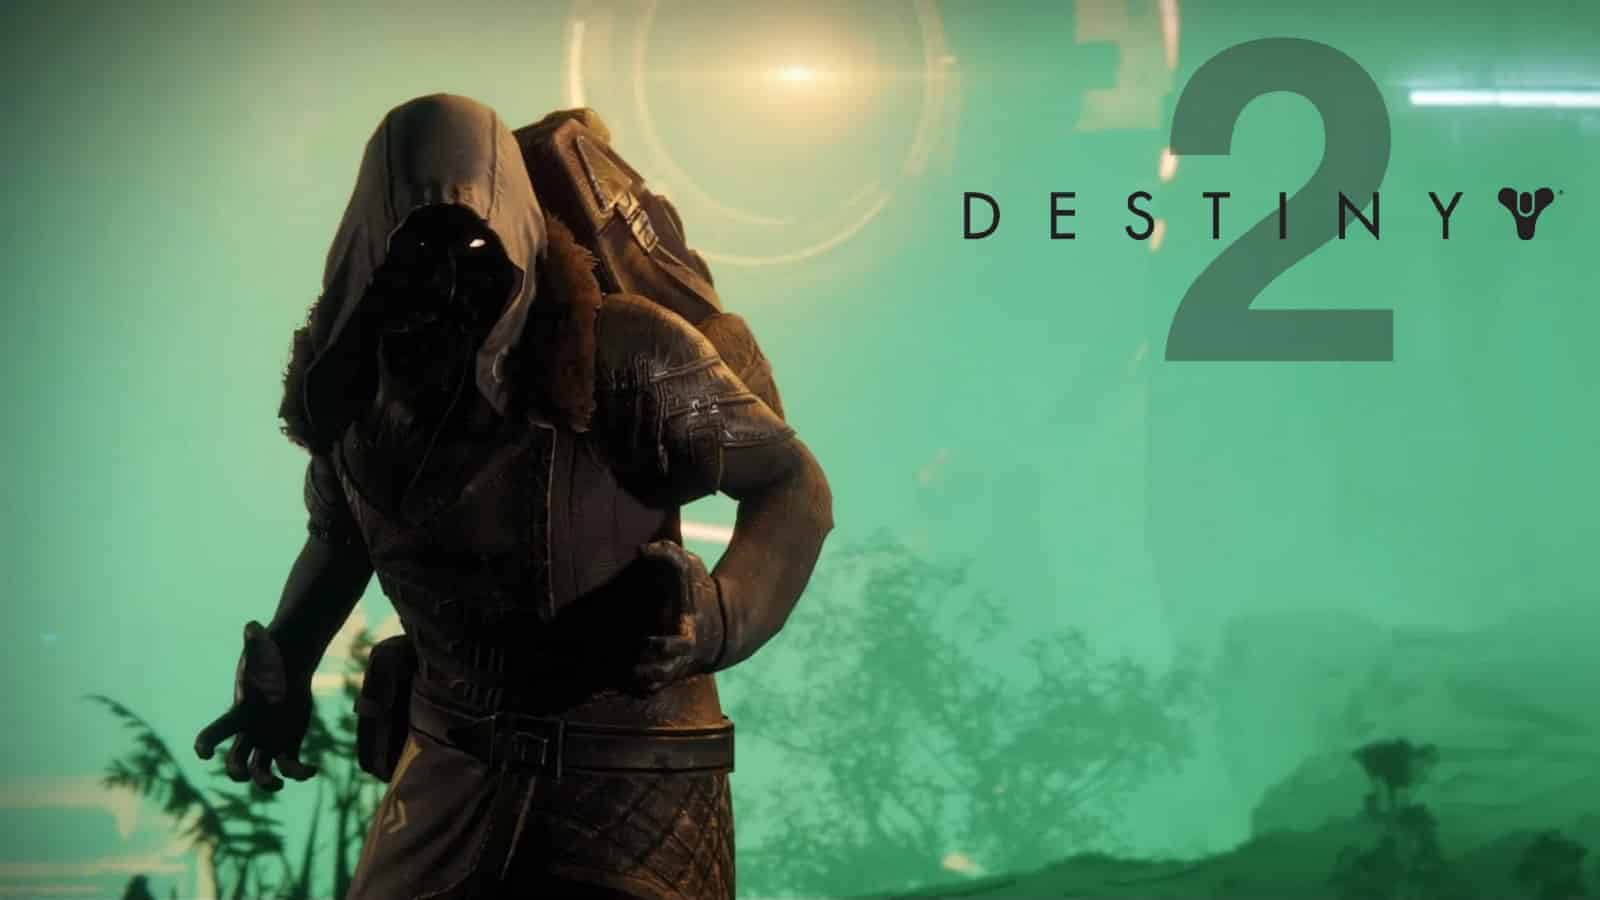 where is xur destiny 2 today